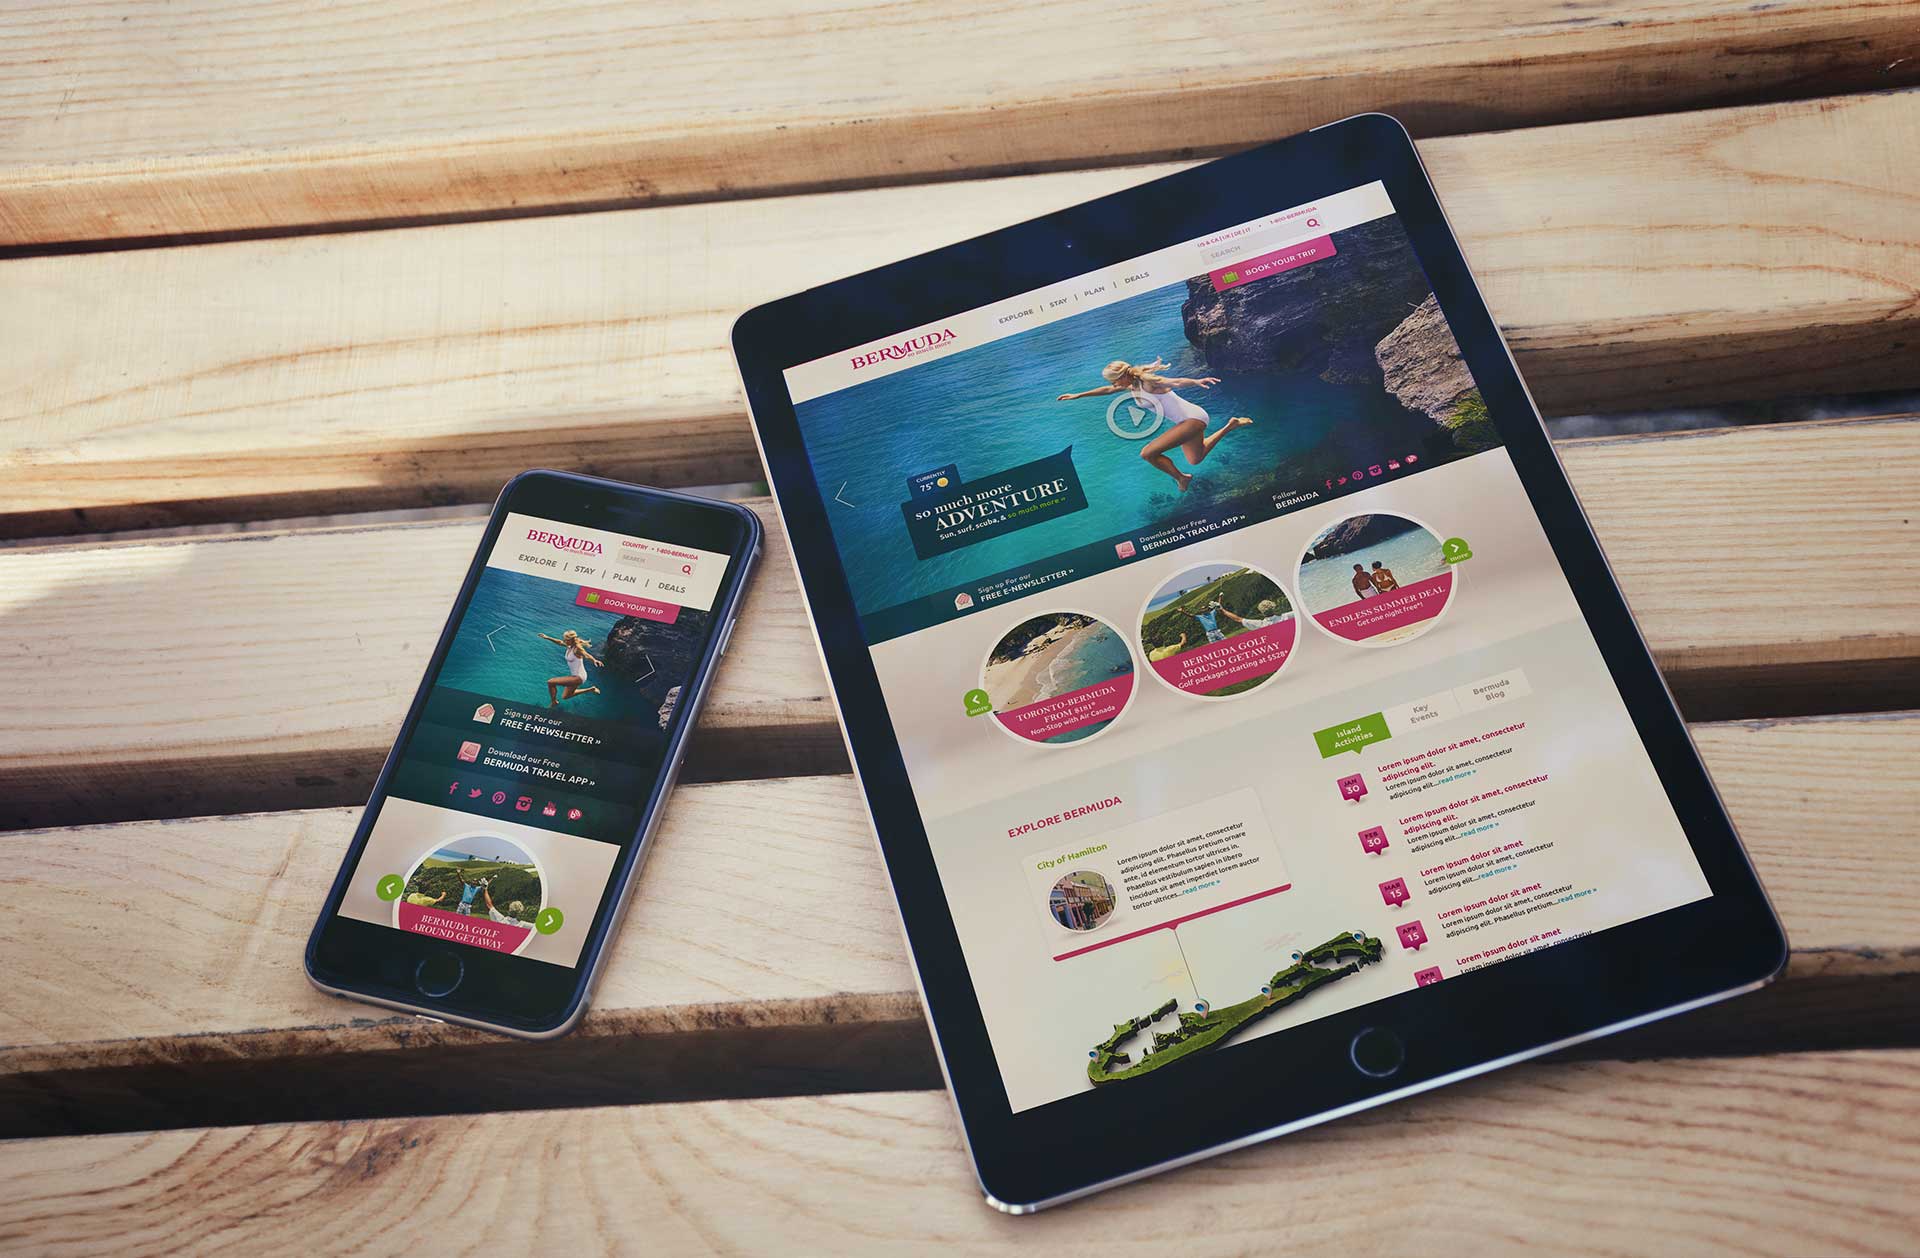 The Bermuda website up on a phone and tablet